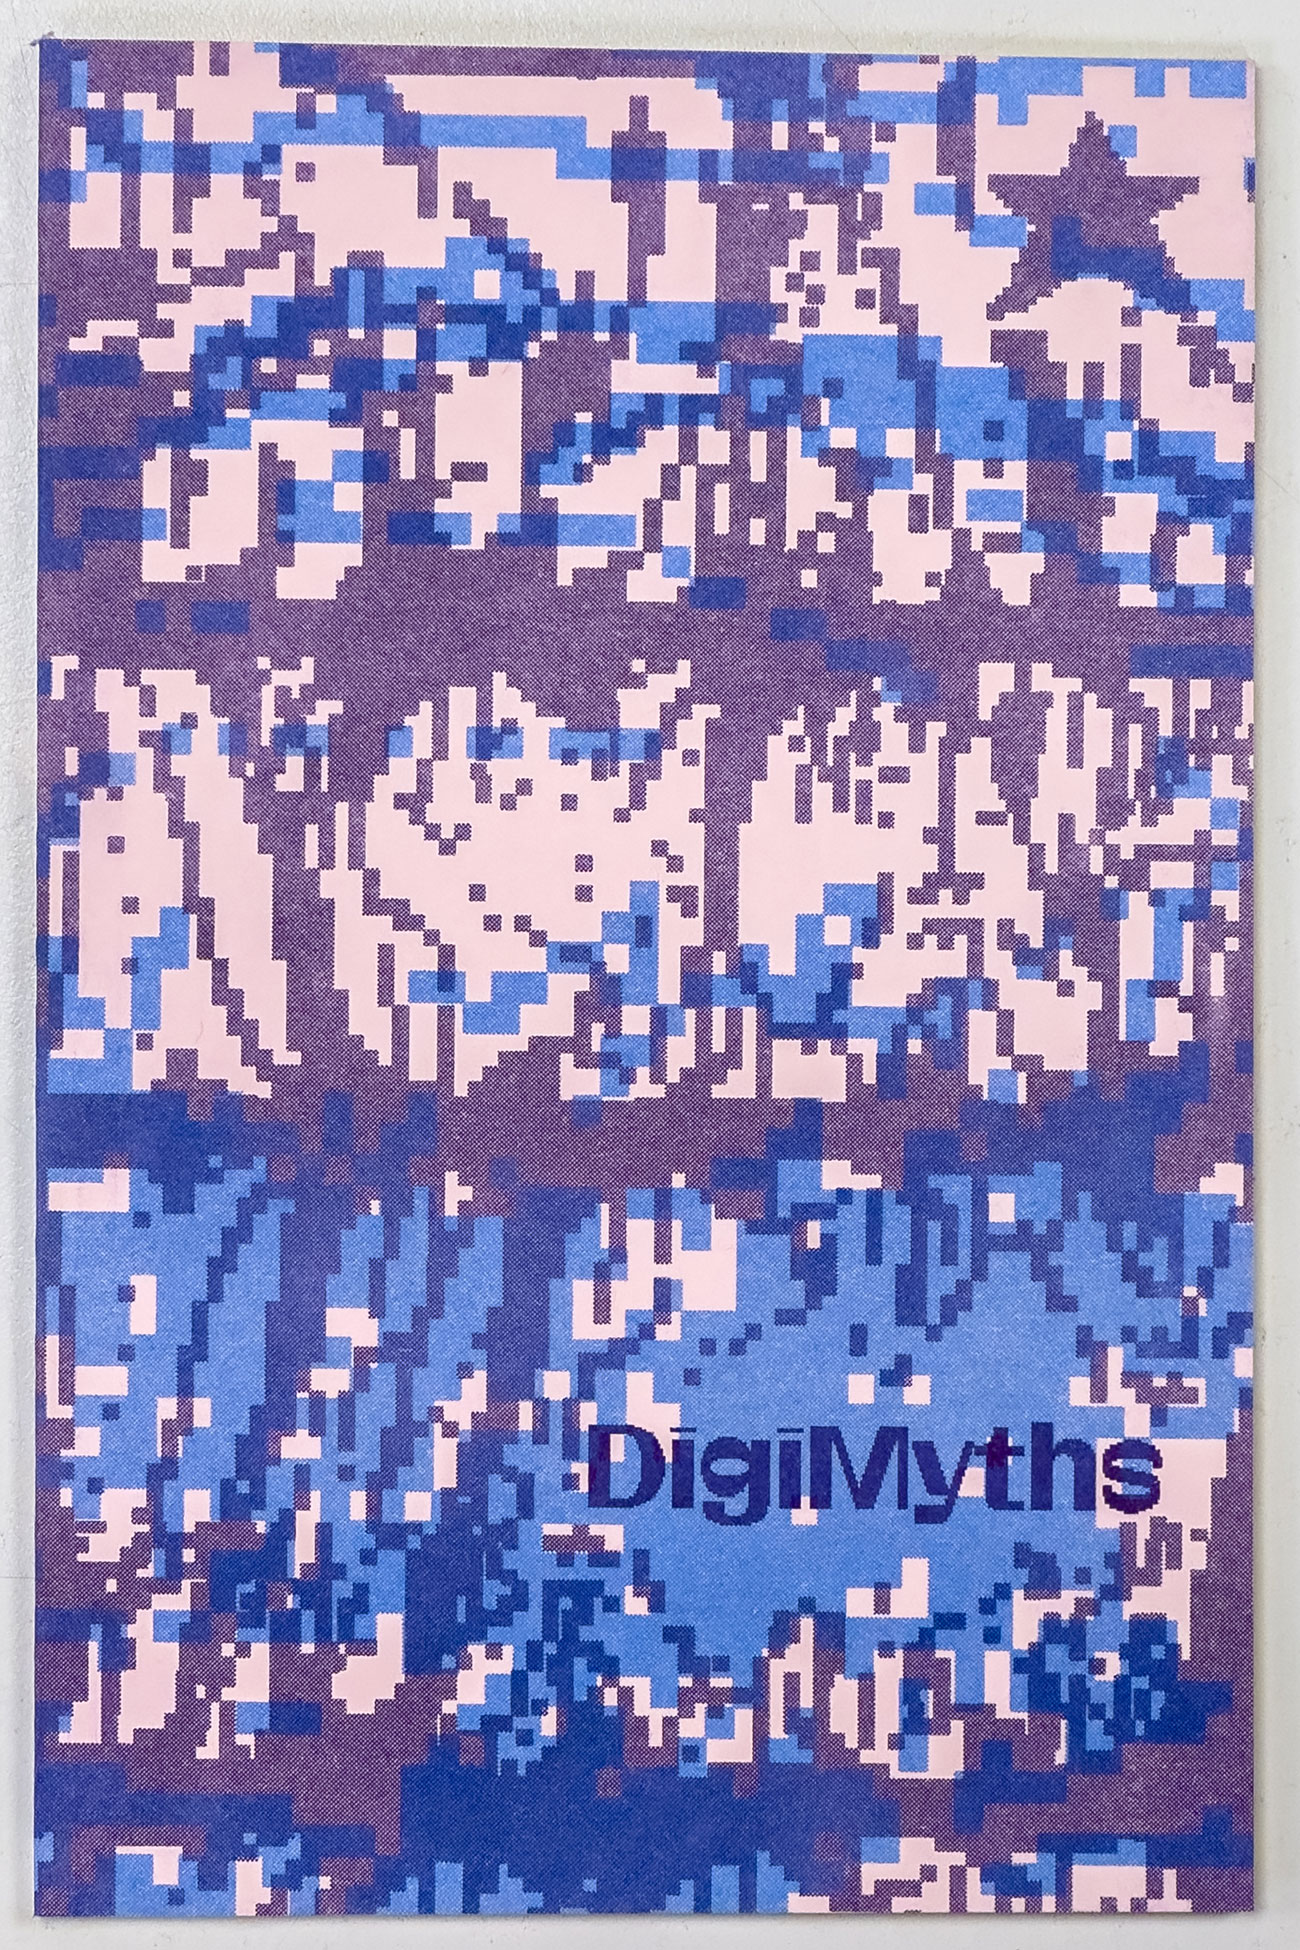 Cryptic illustration in blue and purple with title in the lower right corner. 